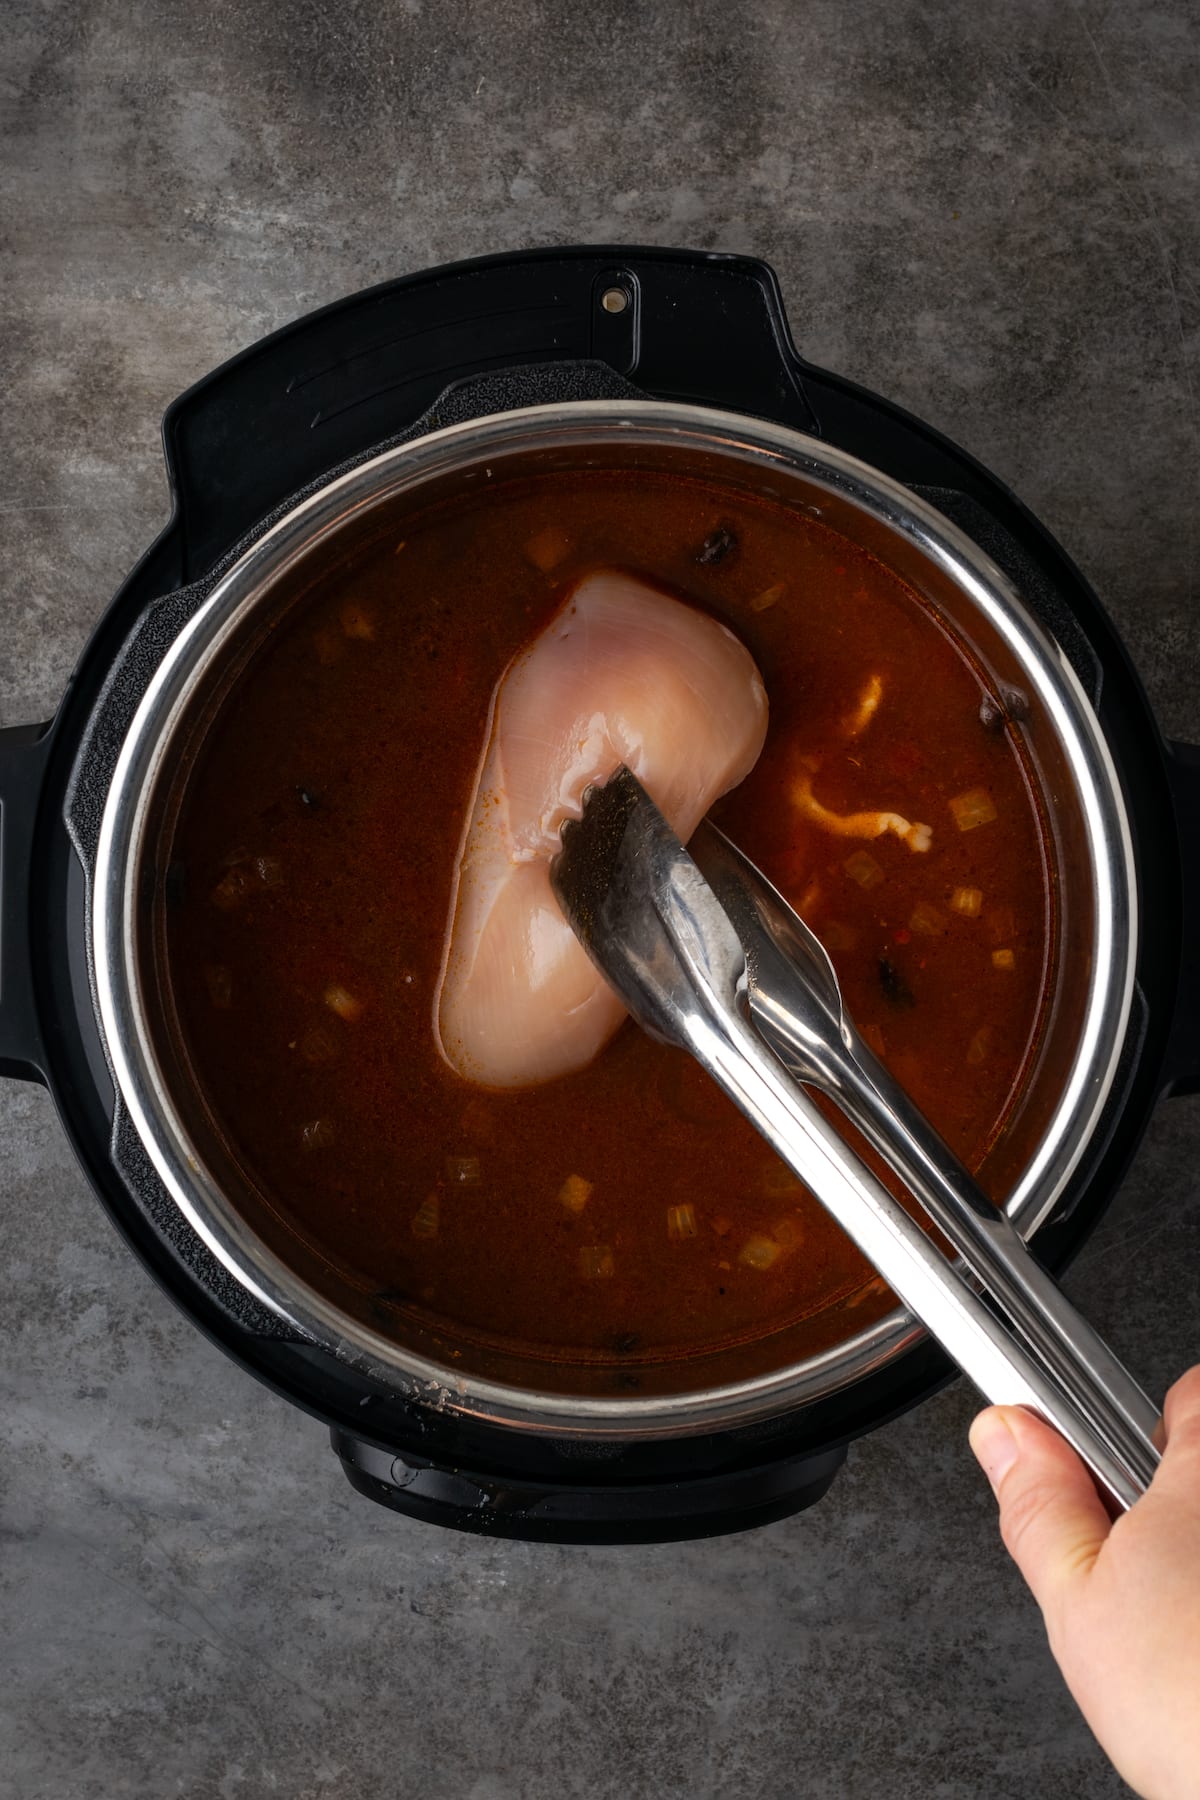 Tongs are used to lower a raw chicken breast into tortilla soup in the Instant Pot.